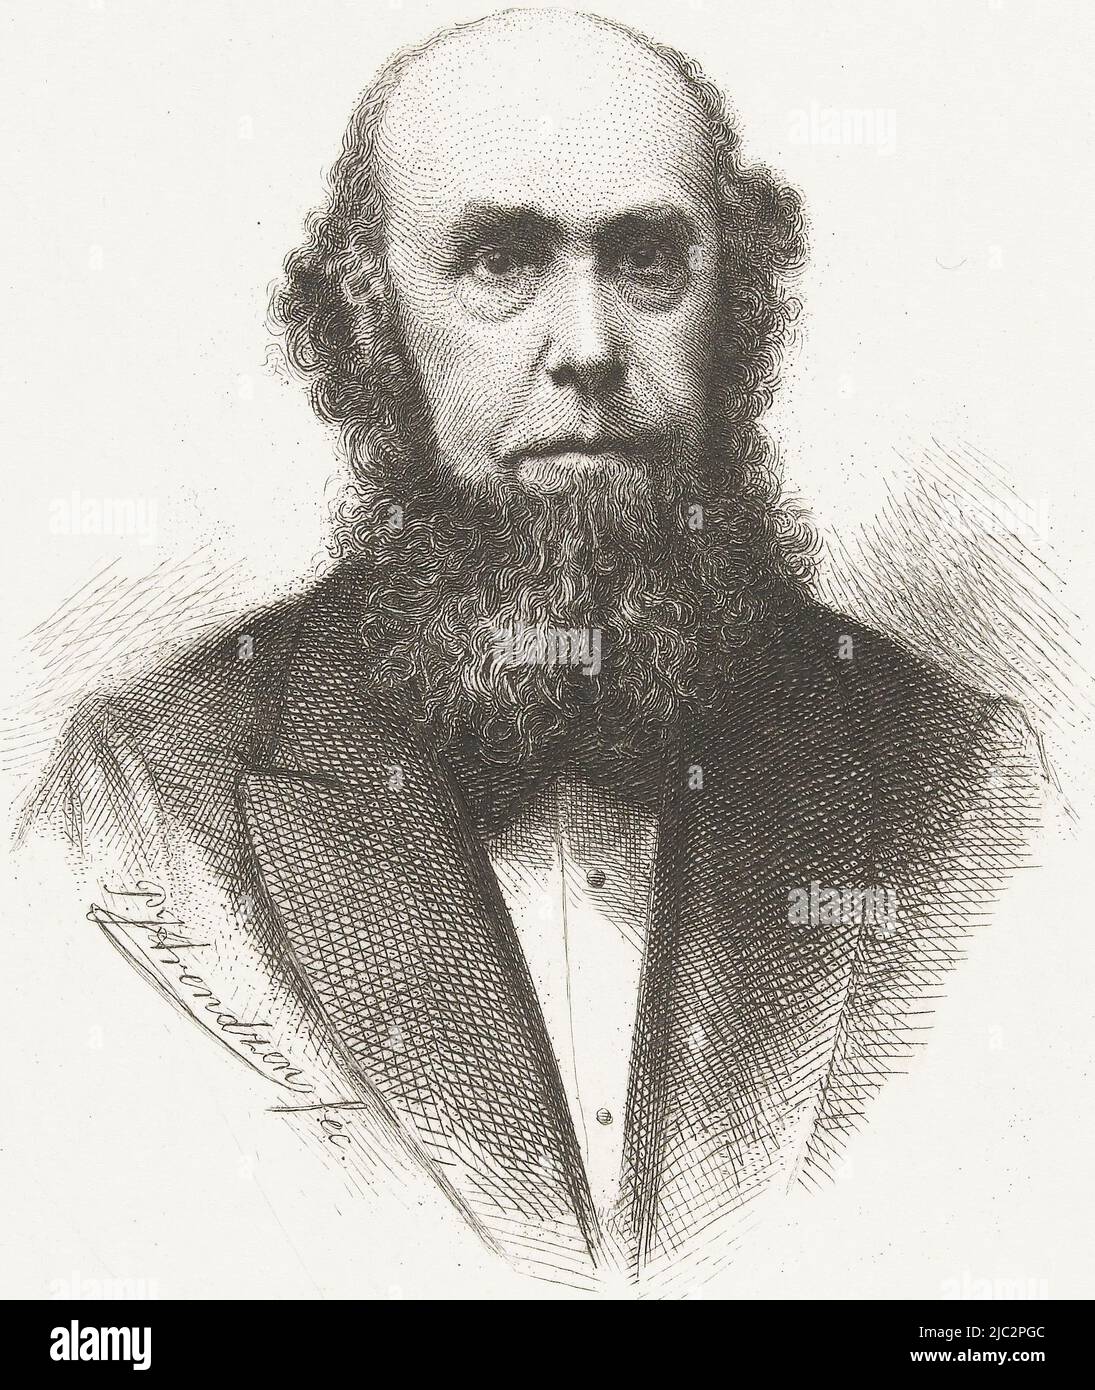 Bust of Frederik Muller. In the lower margin his signature in facsimile., Portrait of Frederik Muller, print maker: Petrus Johannes Arendzen, (mentioned on object), Netherlands, c. 1879 - in or before 1881, paper, etching, engraving Stock Photo